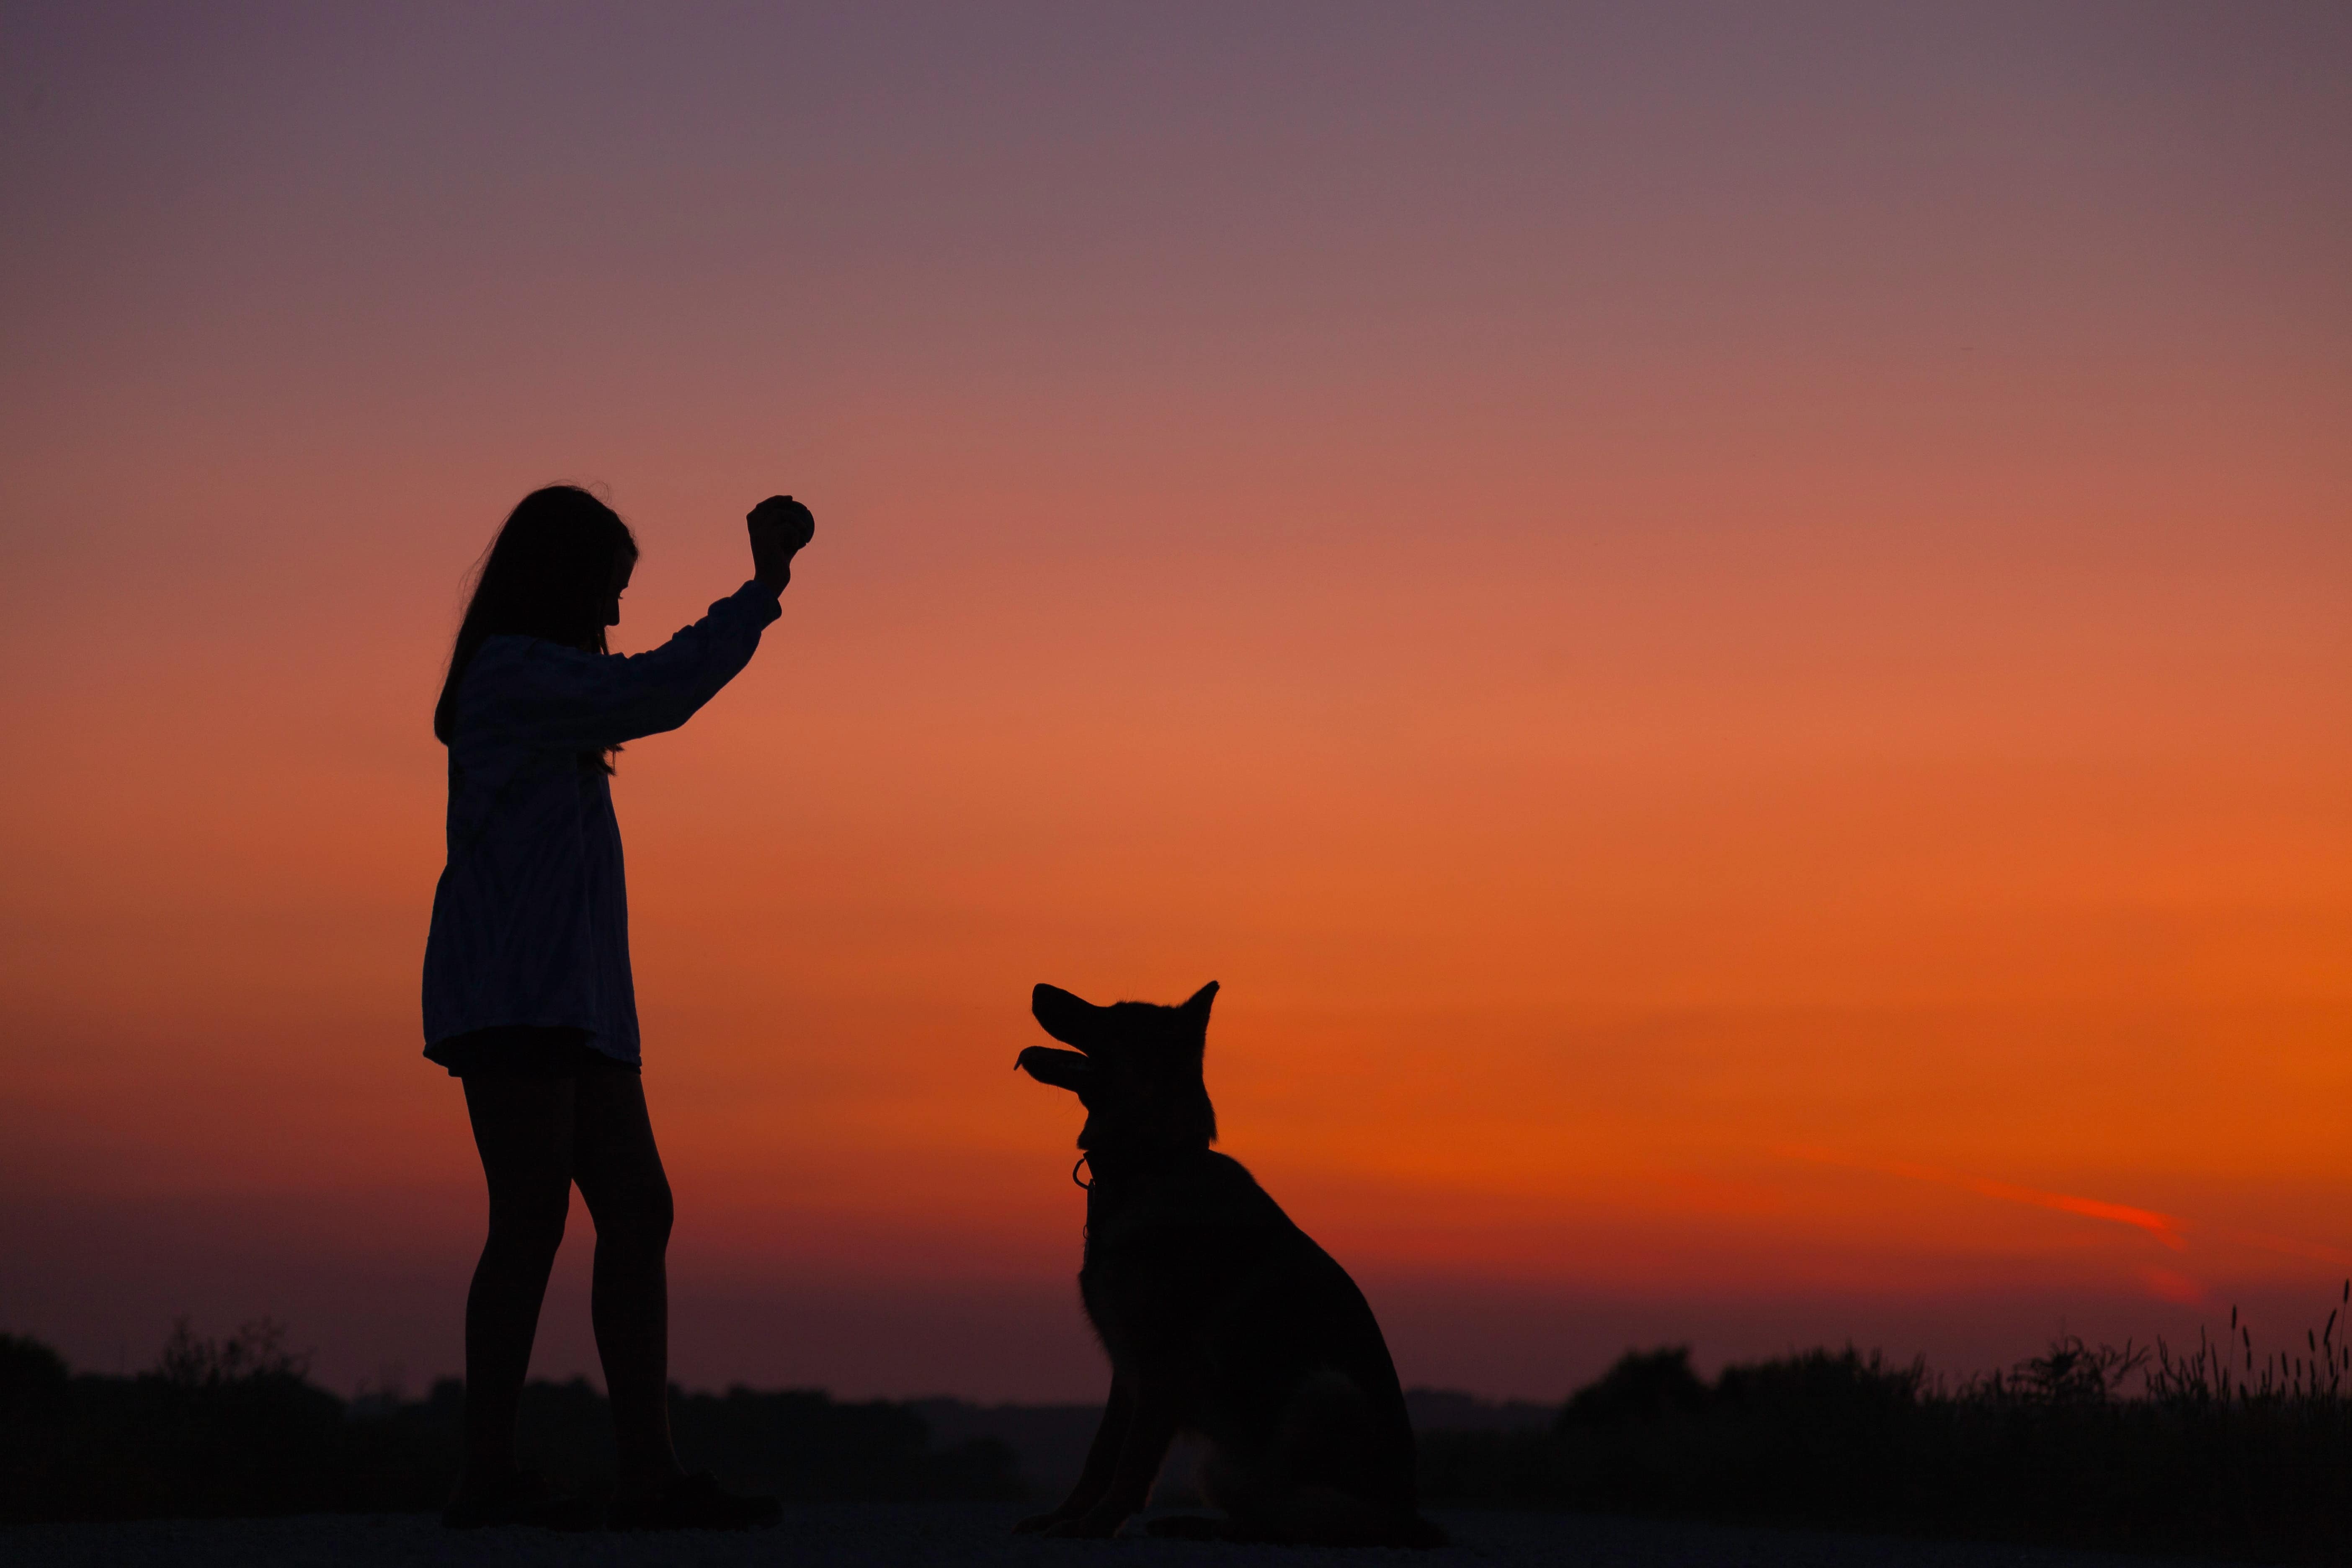 Stock image - family vacation - Woman and pet dog at sunset on holiday - Photo by Wyatt Ryan